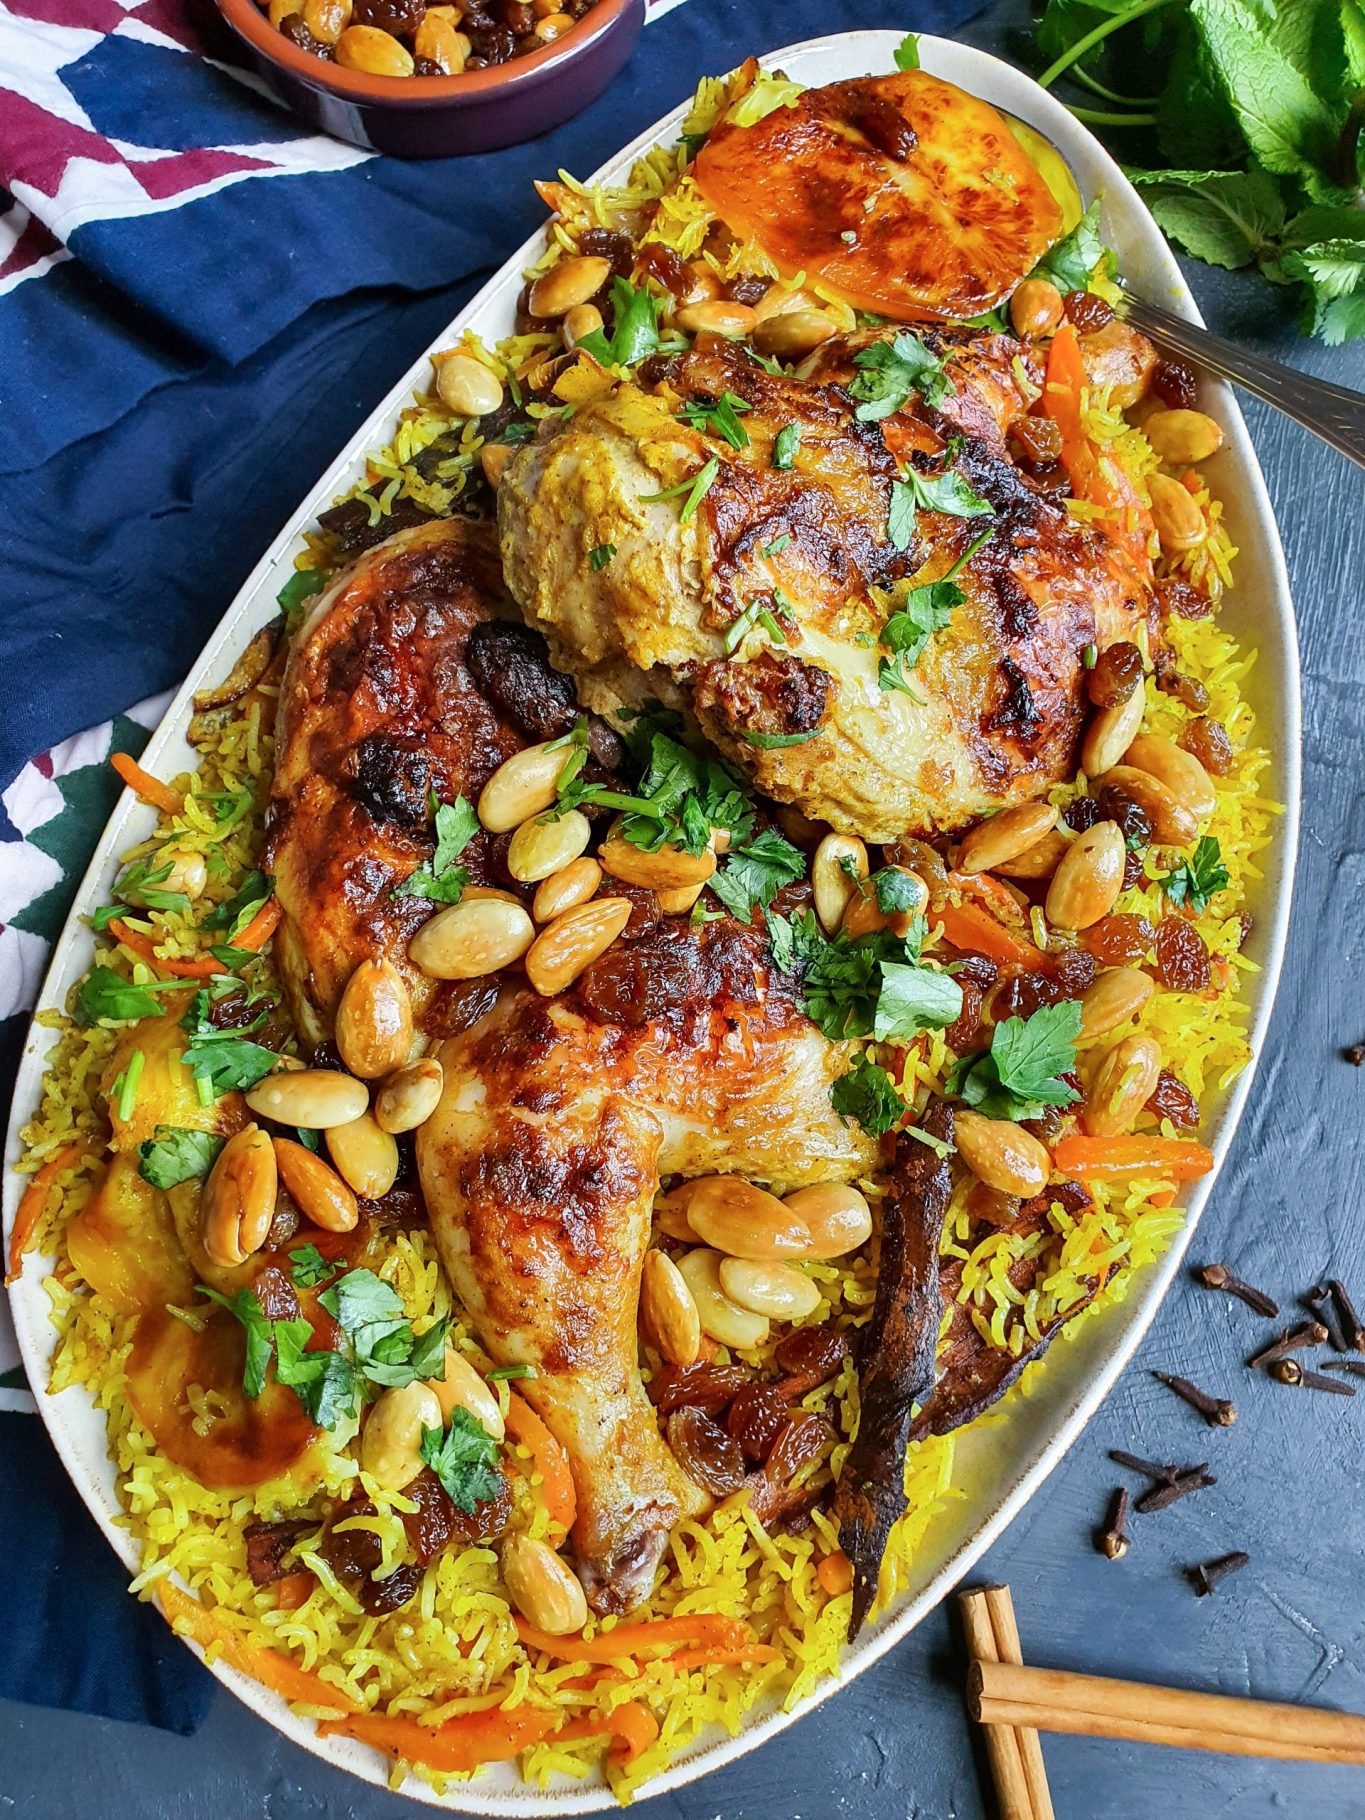 persian carrot rice with saffron chicken dish garnished with toasted almonds, sultanas, and finely chopped parsley. Looks so yummy!